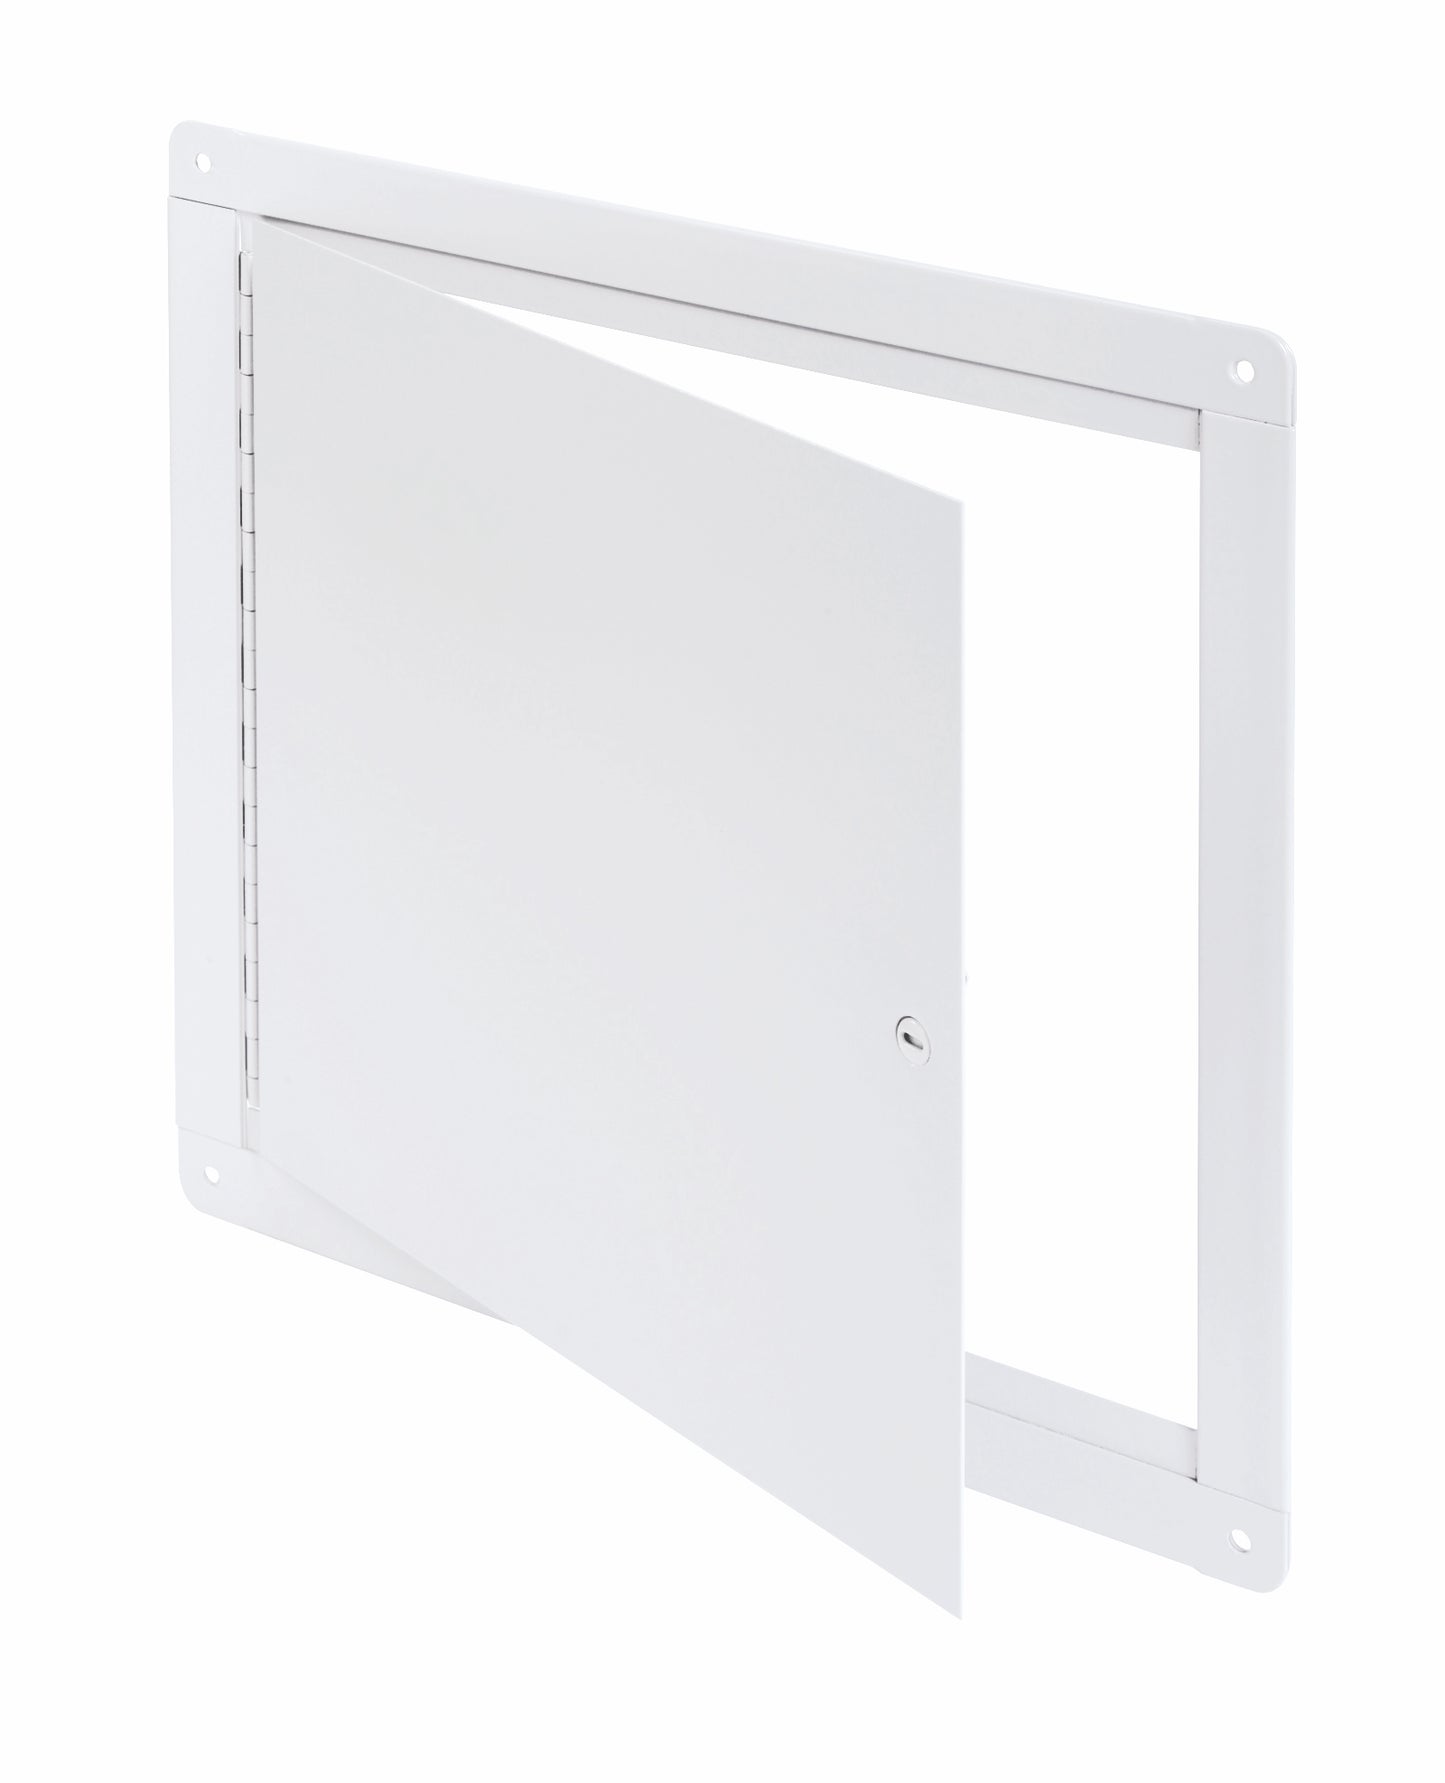 8"x8" Flush Universal Surface Mounted Access Door with Exposed Flange, Cendrex